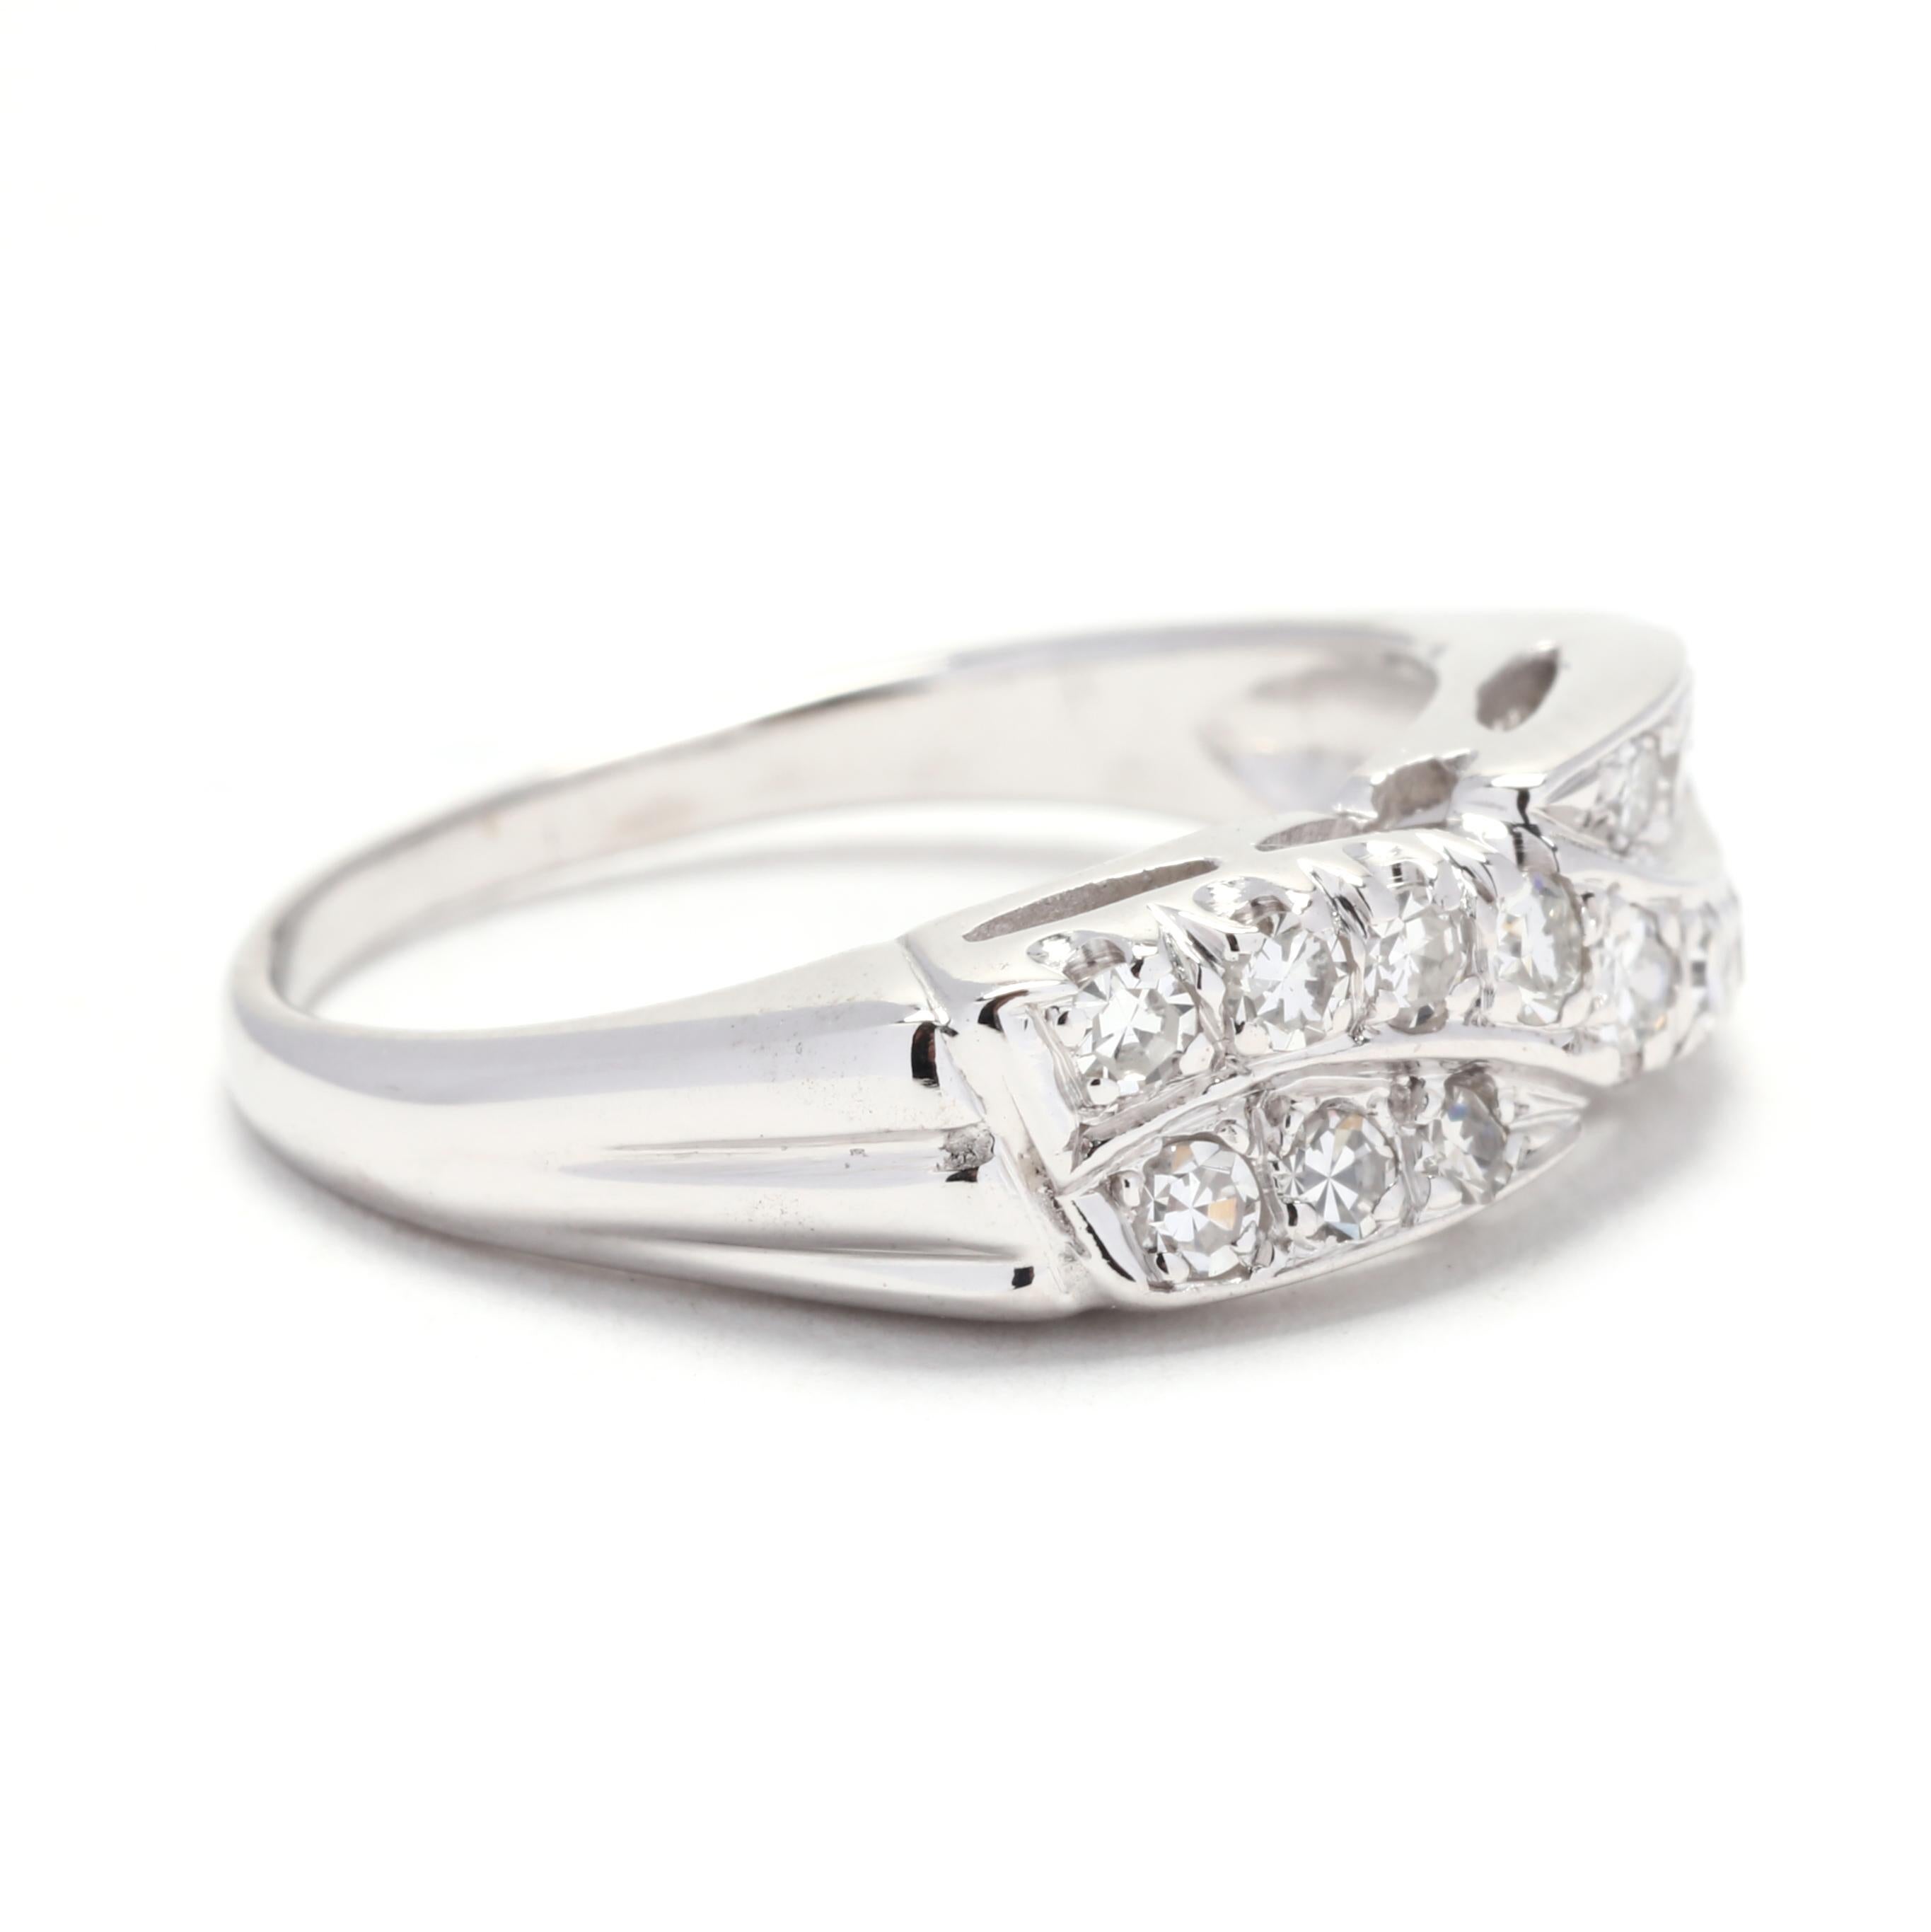 This vintage-inspired diamond crossover band ring is a beautiful and unique choice for your wedding band. Crafted in 14K white gold, this ring features a delicate crossover design adorned with sparkling round diamonds. The total carat weight of this